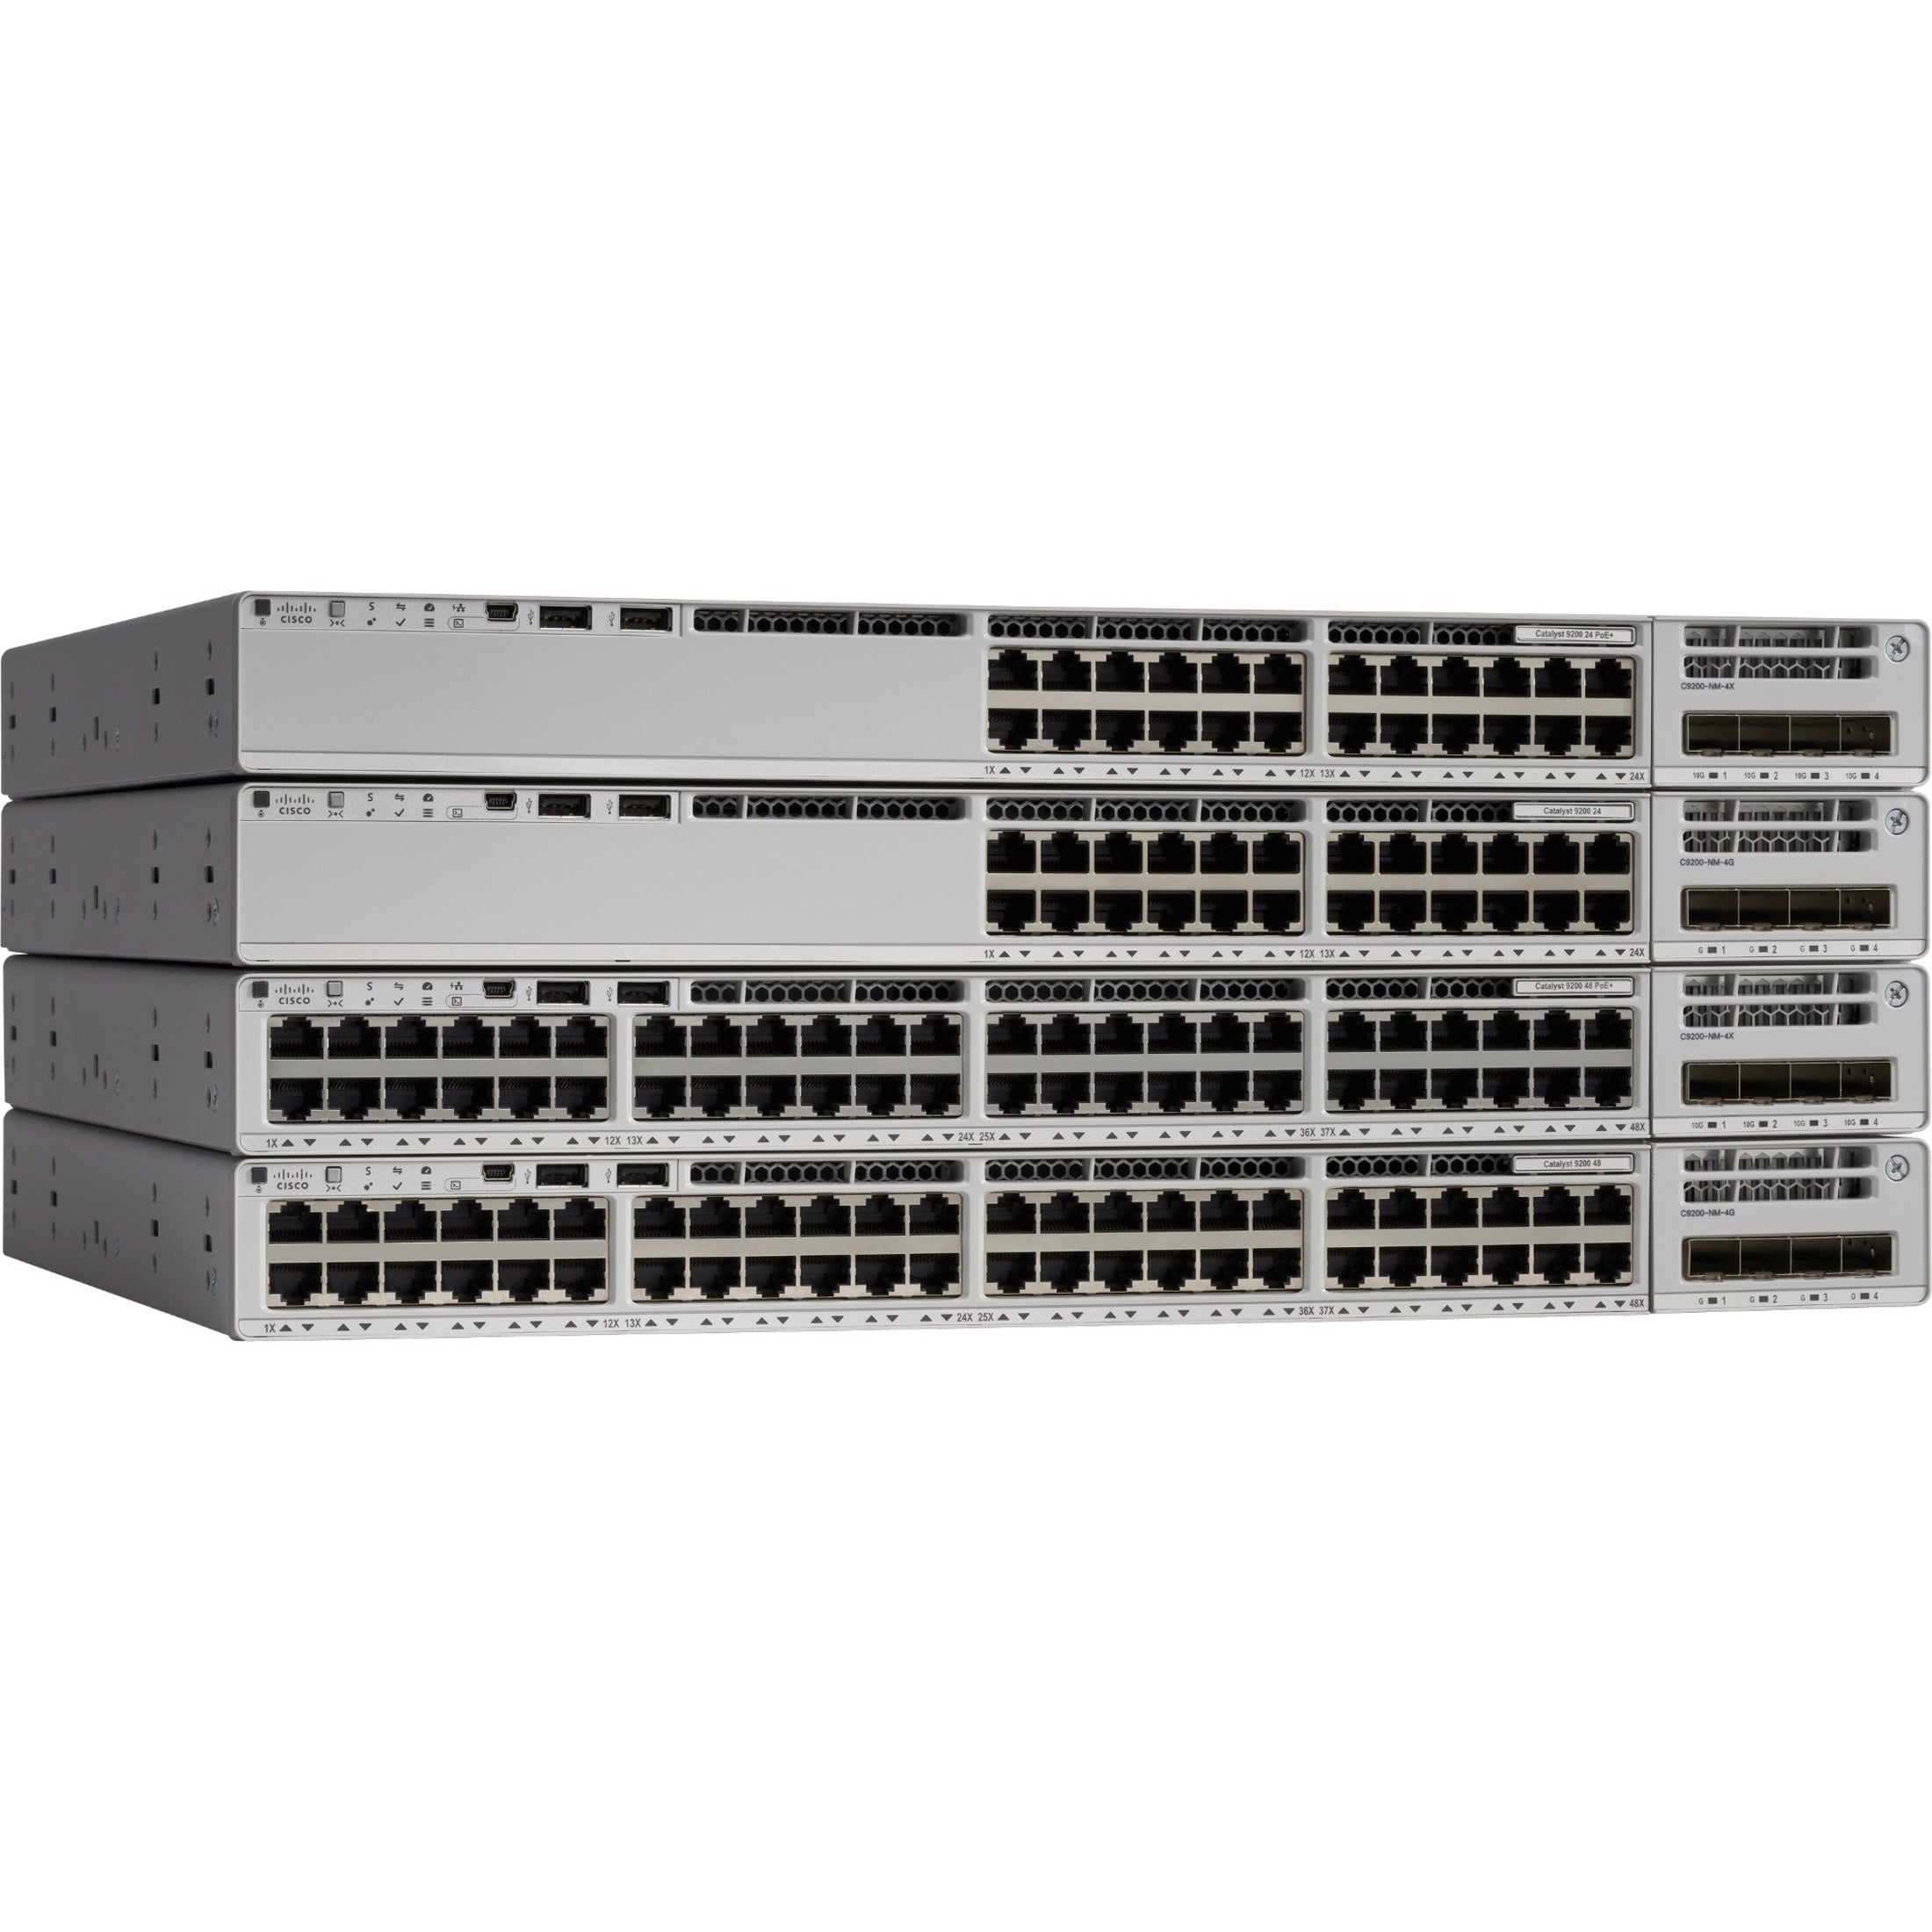 Cisco C9200-24T-A Catalyst C9200-24T Layer 3 Switch, 24 x Gigabit Ethernet Network, Power Supply, Manageable